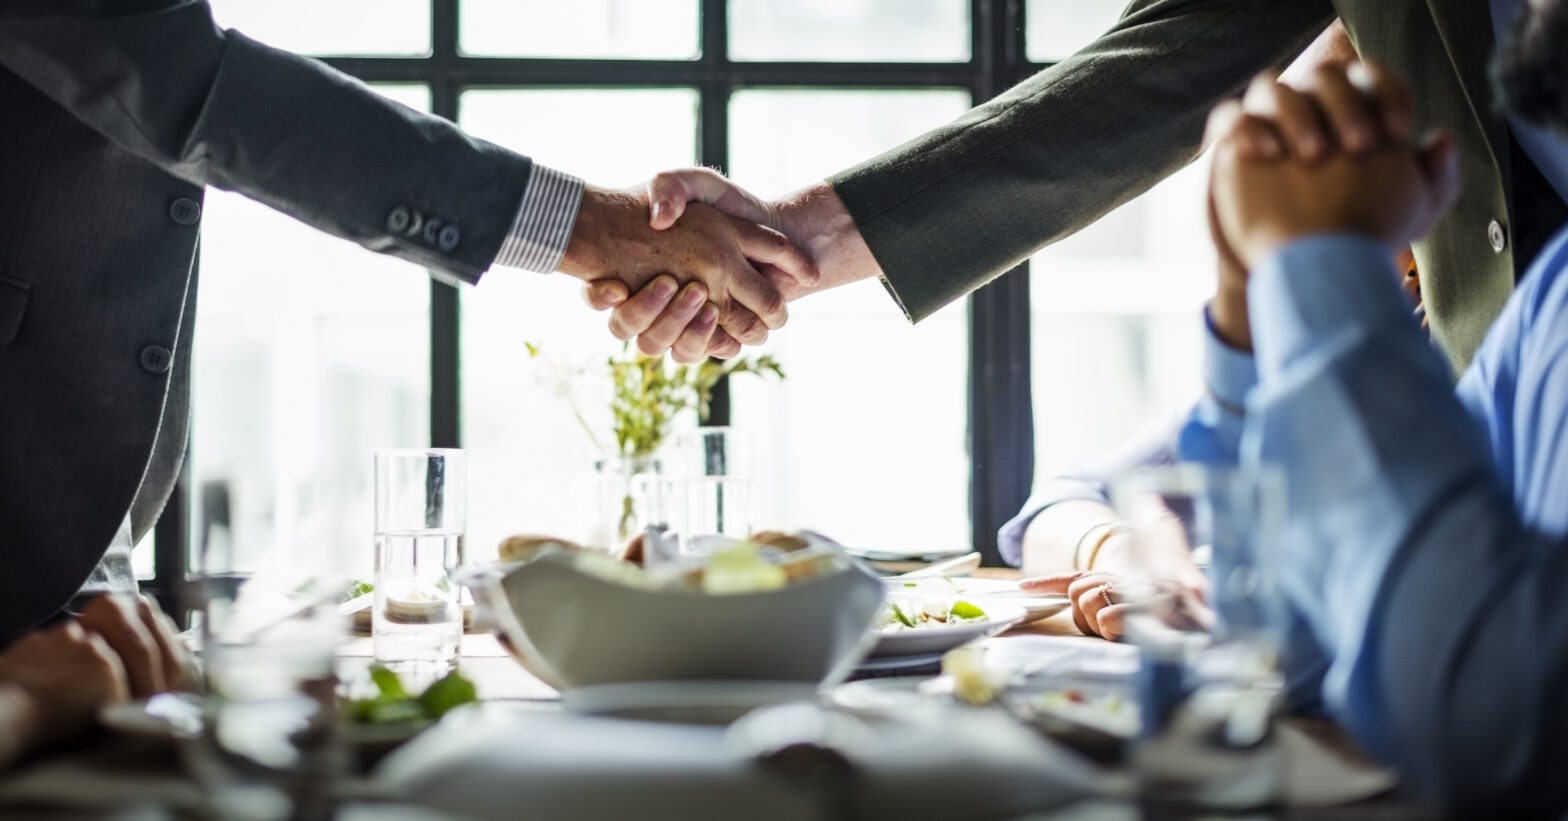 Business deal handshake in over a table in a restaurant